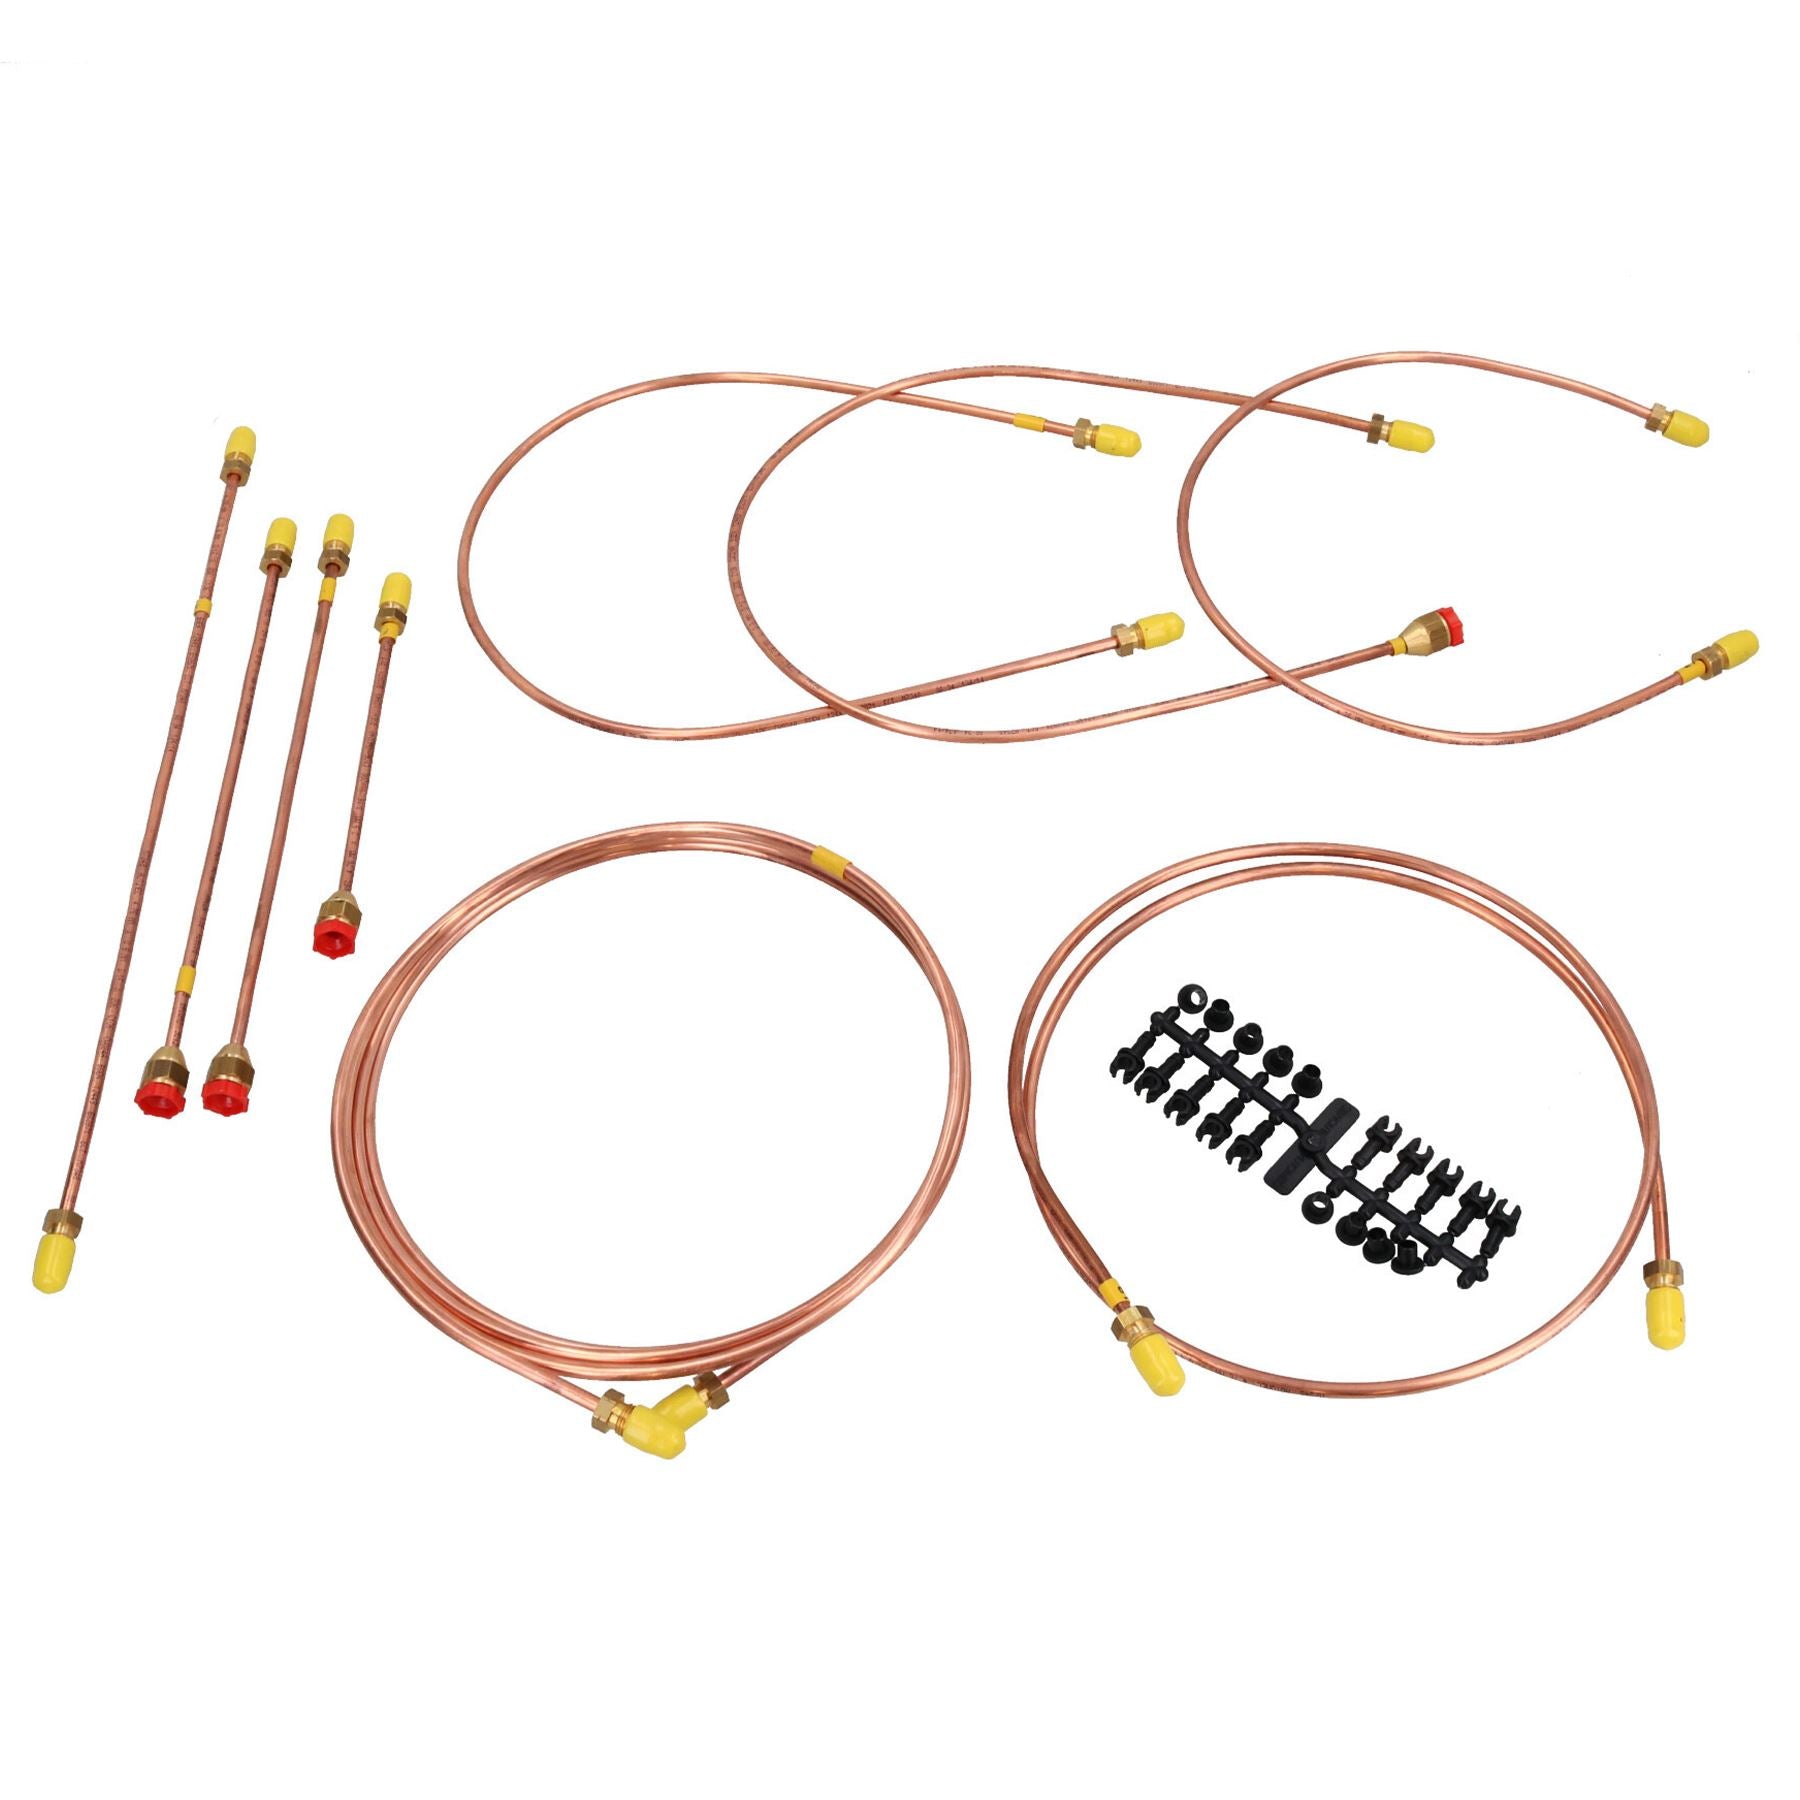 Full Copper & Brass Brake Line Fitting Set to fit Classic MINI 1989-2000 by Automec